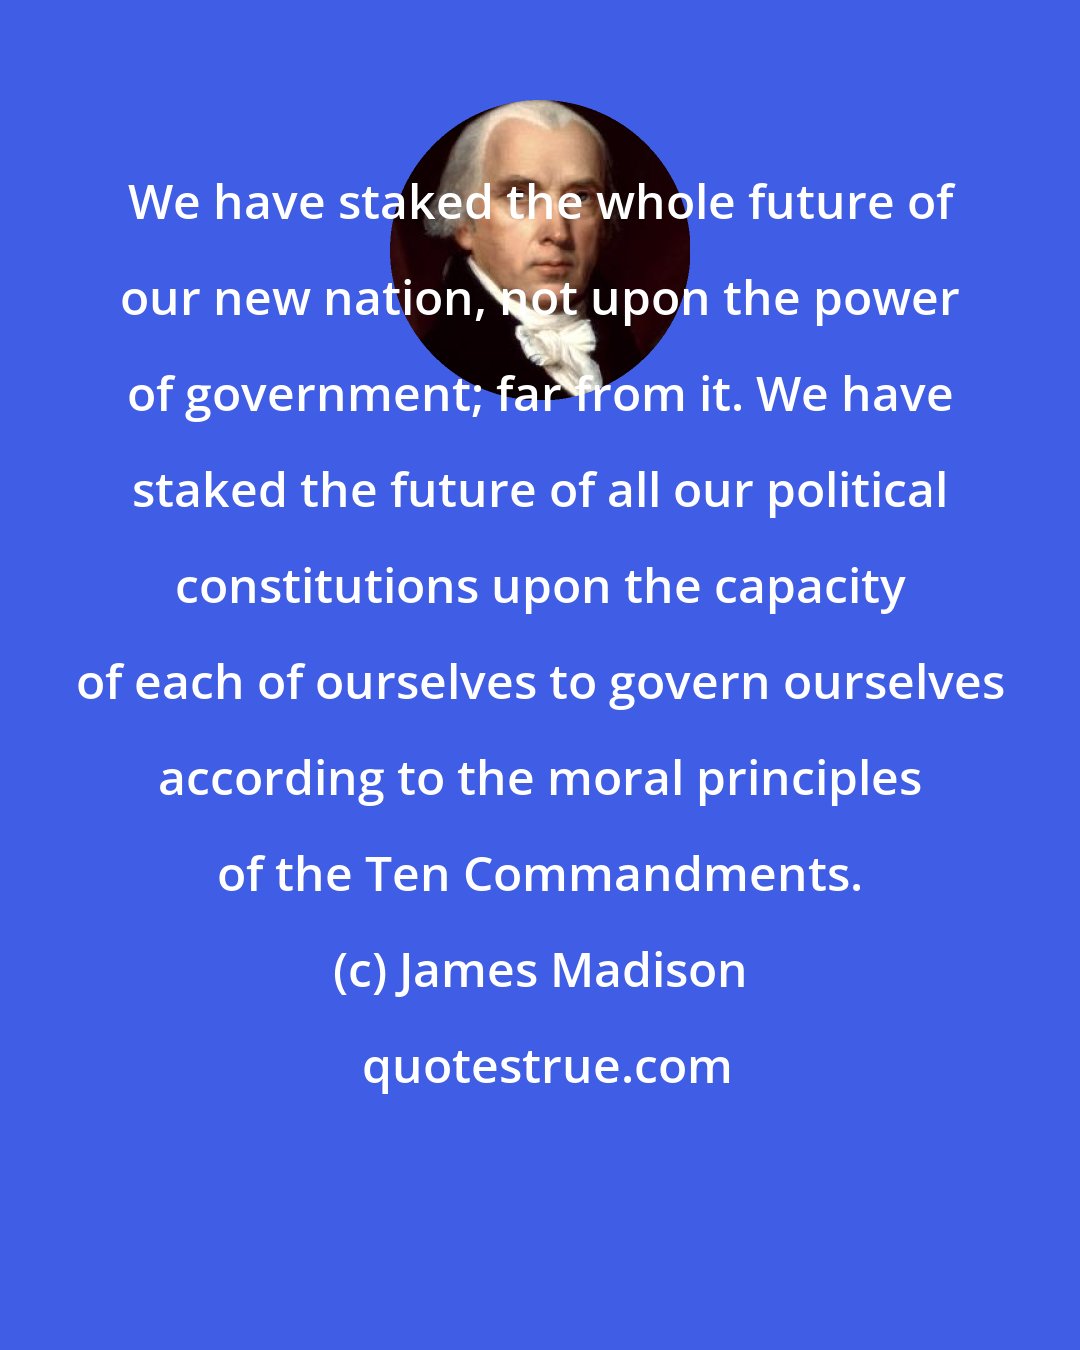 James Madison: We have staked the whole future of our new nation, not upon the power of government; far from it. We have staked the future of all our political constitutions upon the capacity of each of ourselves to govern ourselves according to the moral principles of the Ten Commandments.